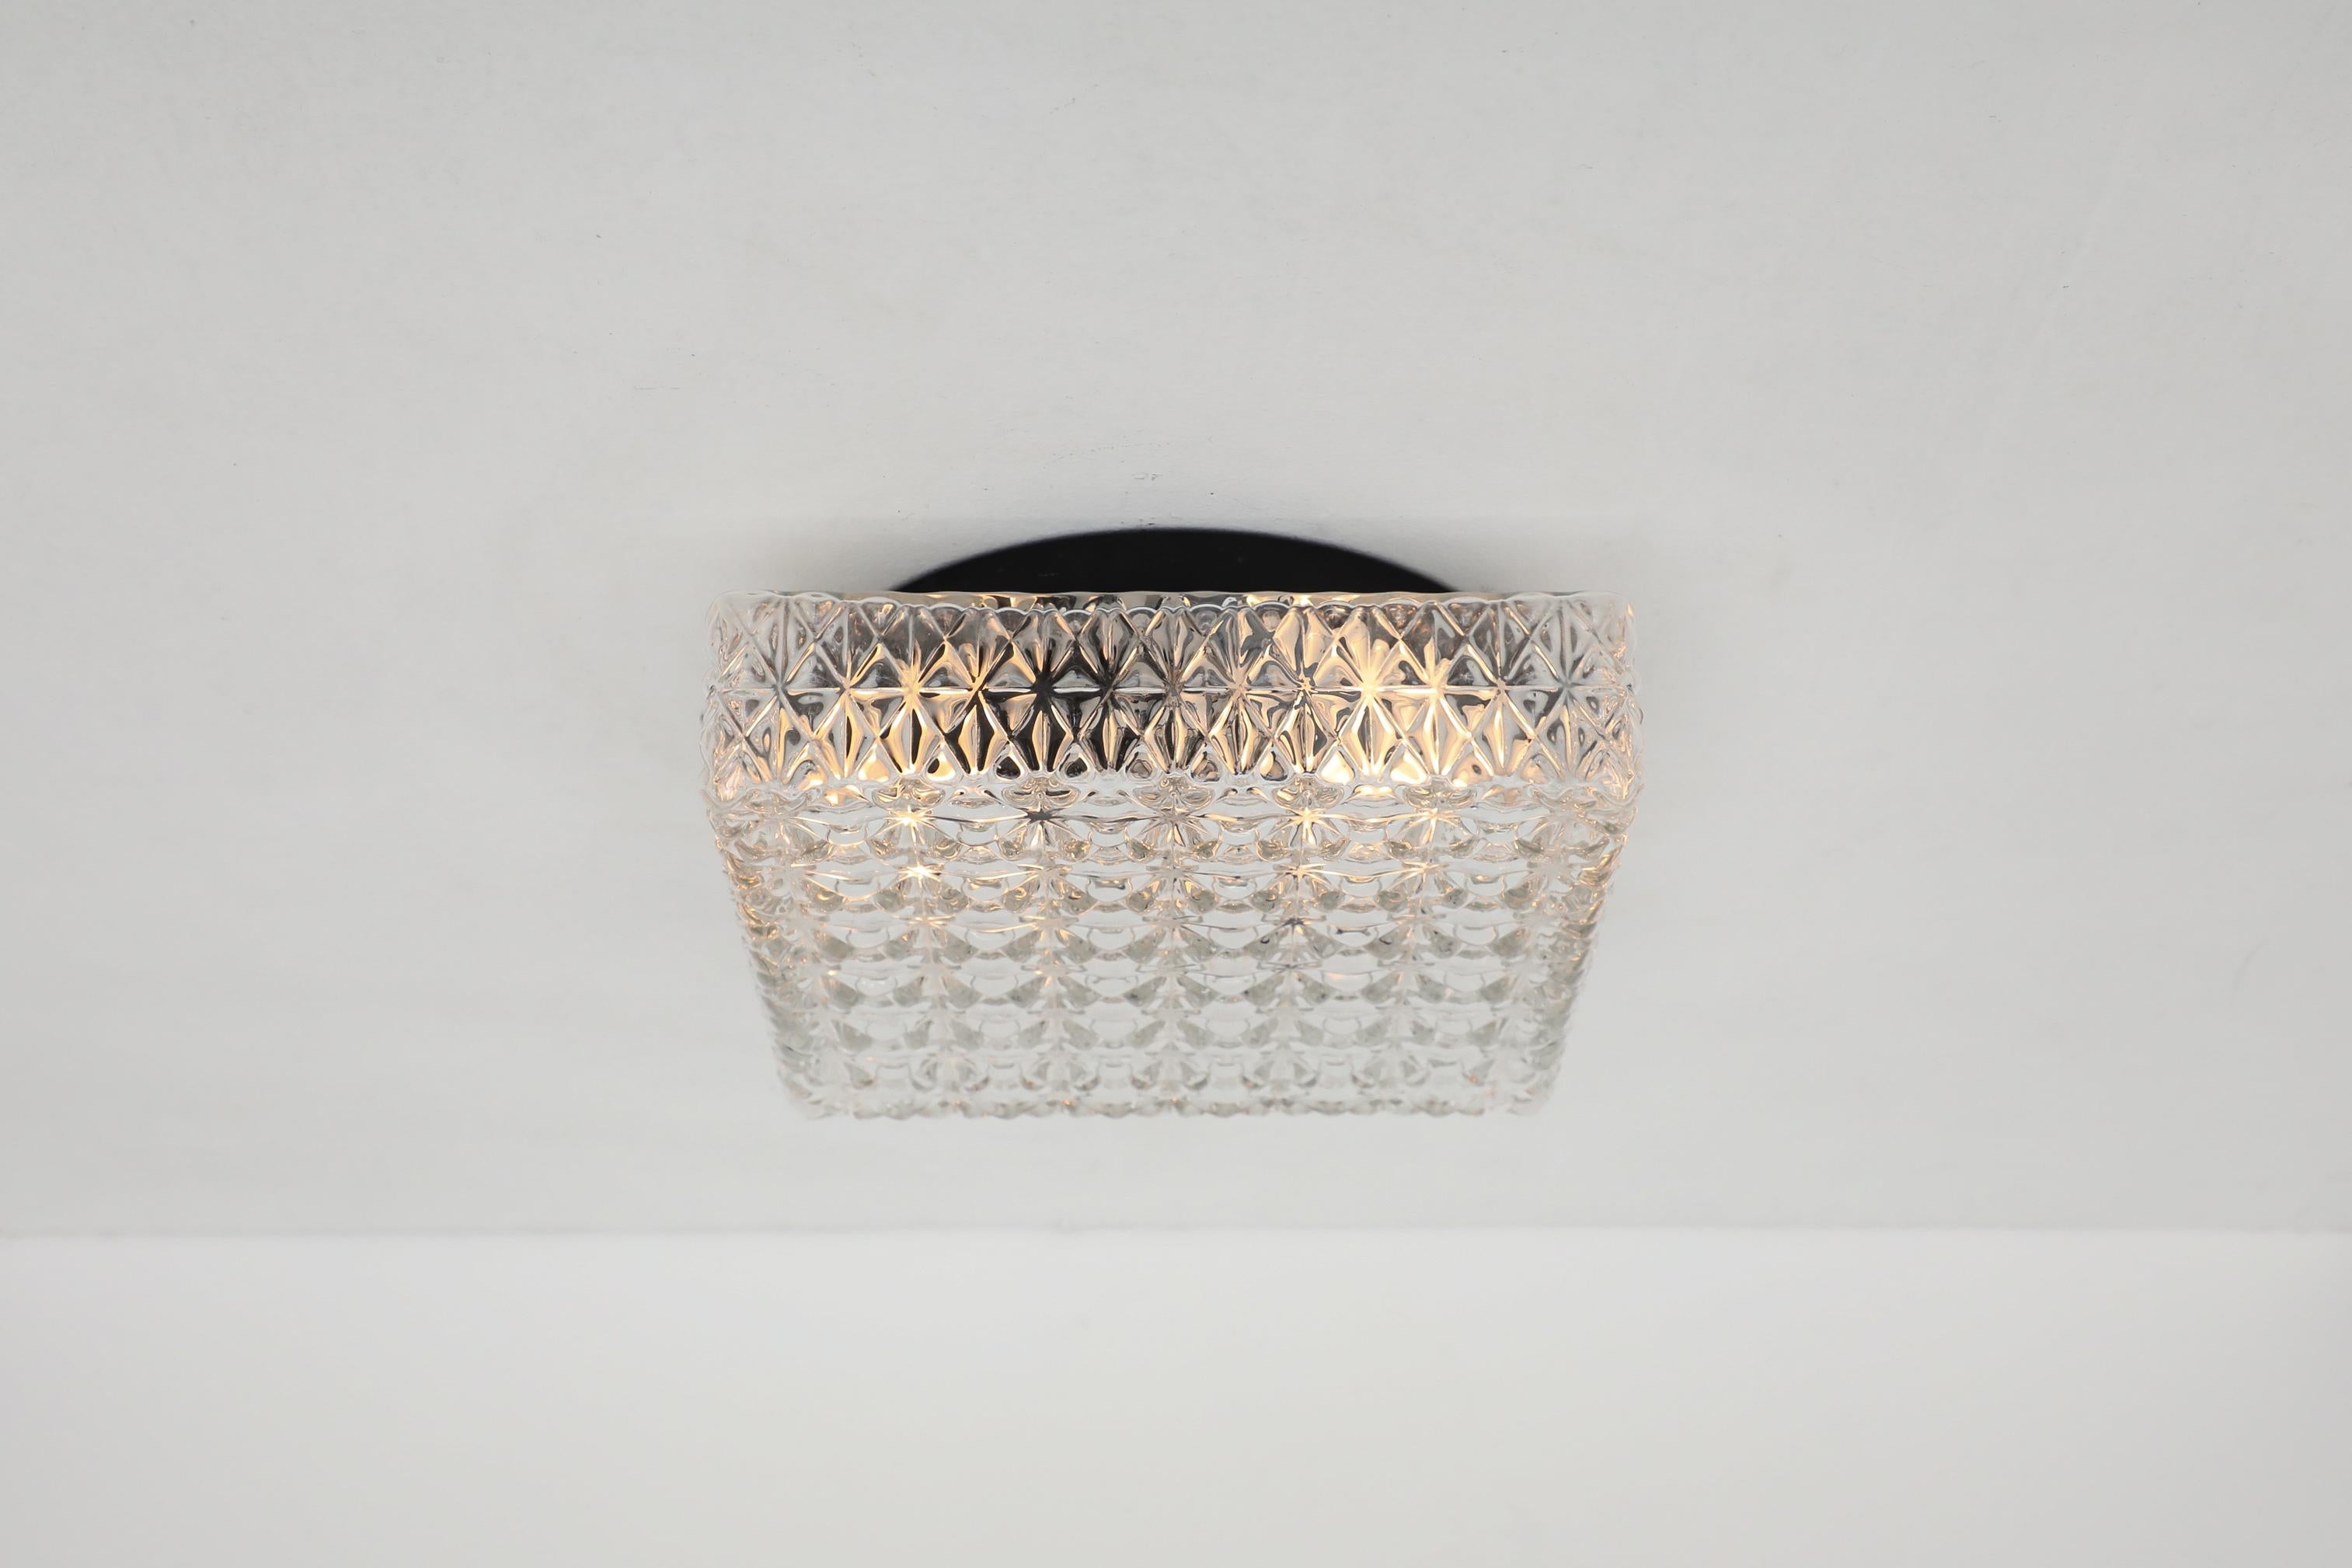 Stunning heavy square Mid-Century textured glass ceiling sconce. In original condition with visible wear consistent with its age and use.This lamp is hardwired and takes a medium base E26/E27 bulb. Many other similar sconces are available in